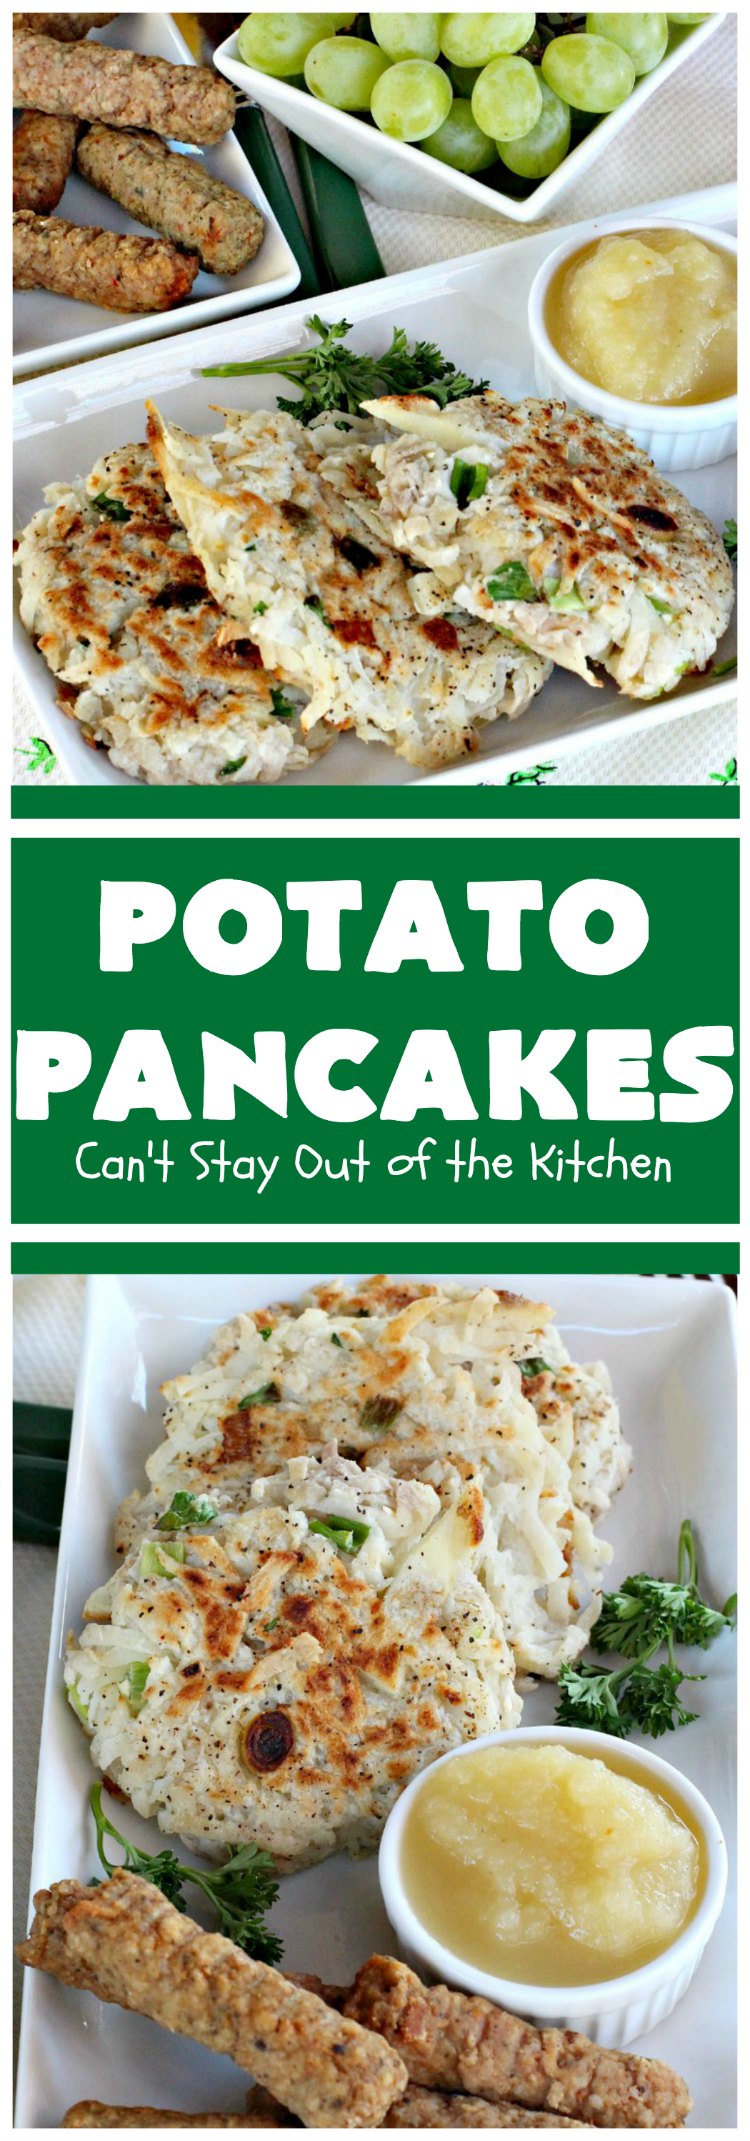 Potato Pancakes | Can't Stay Out of the Kitchen